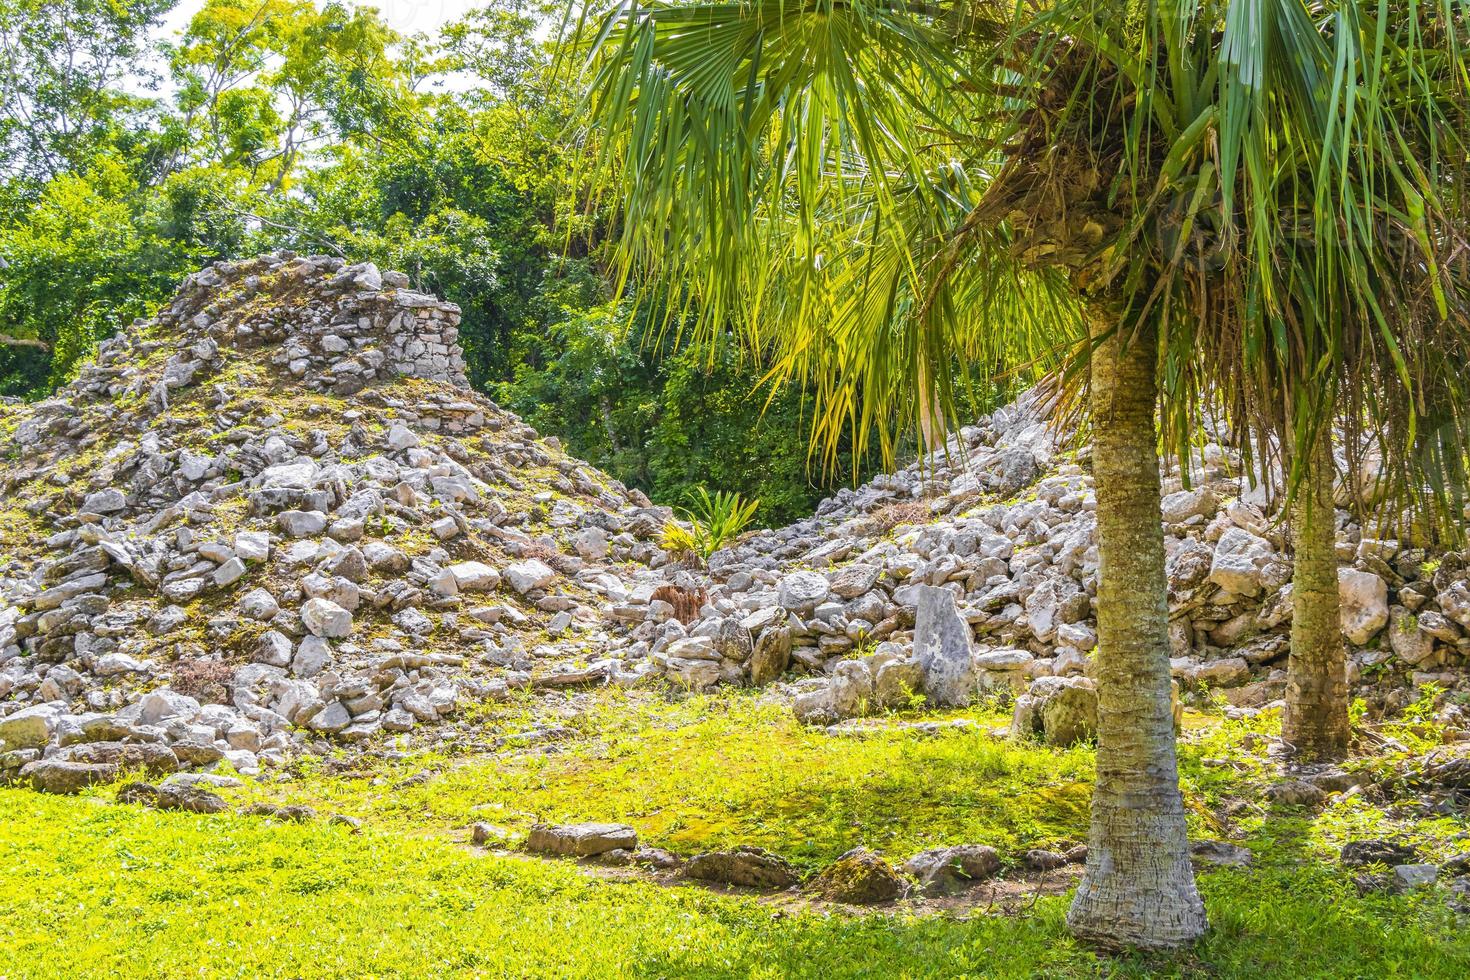 Ancient Mayan site with temple ruins pyramids artifacts Muyil Mexico. photo